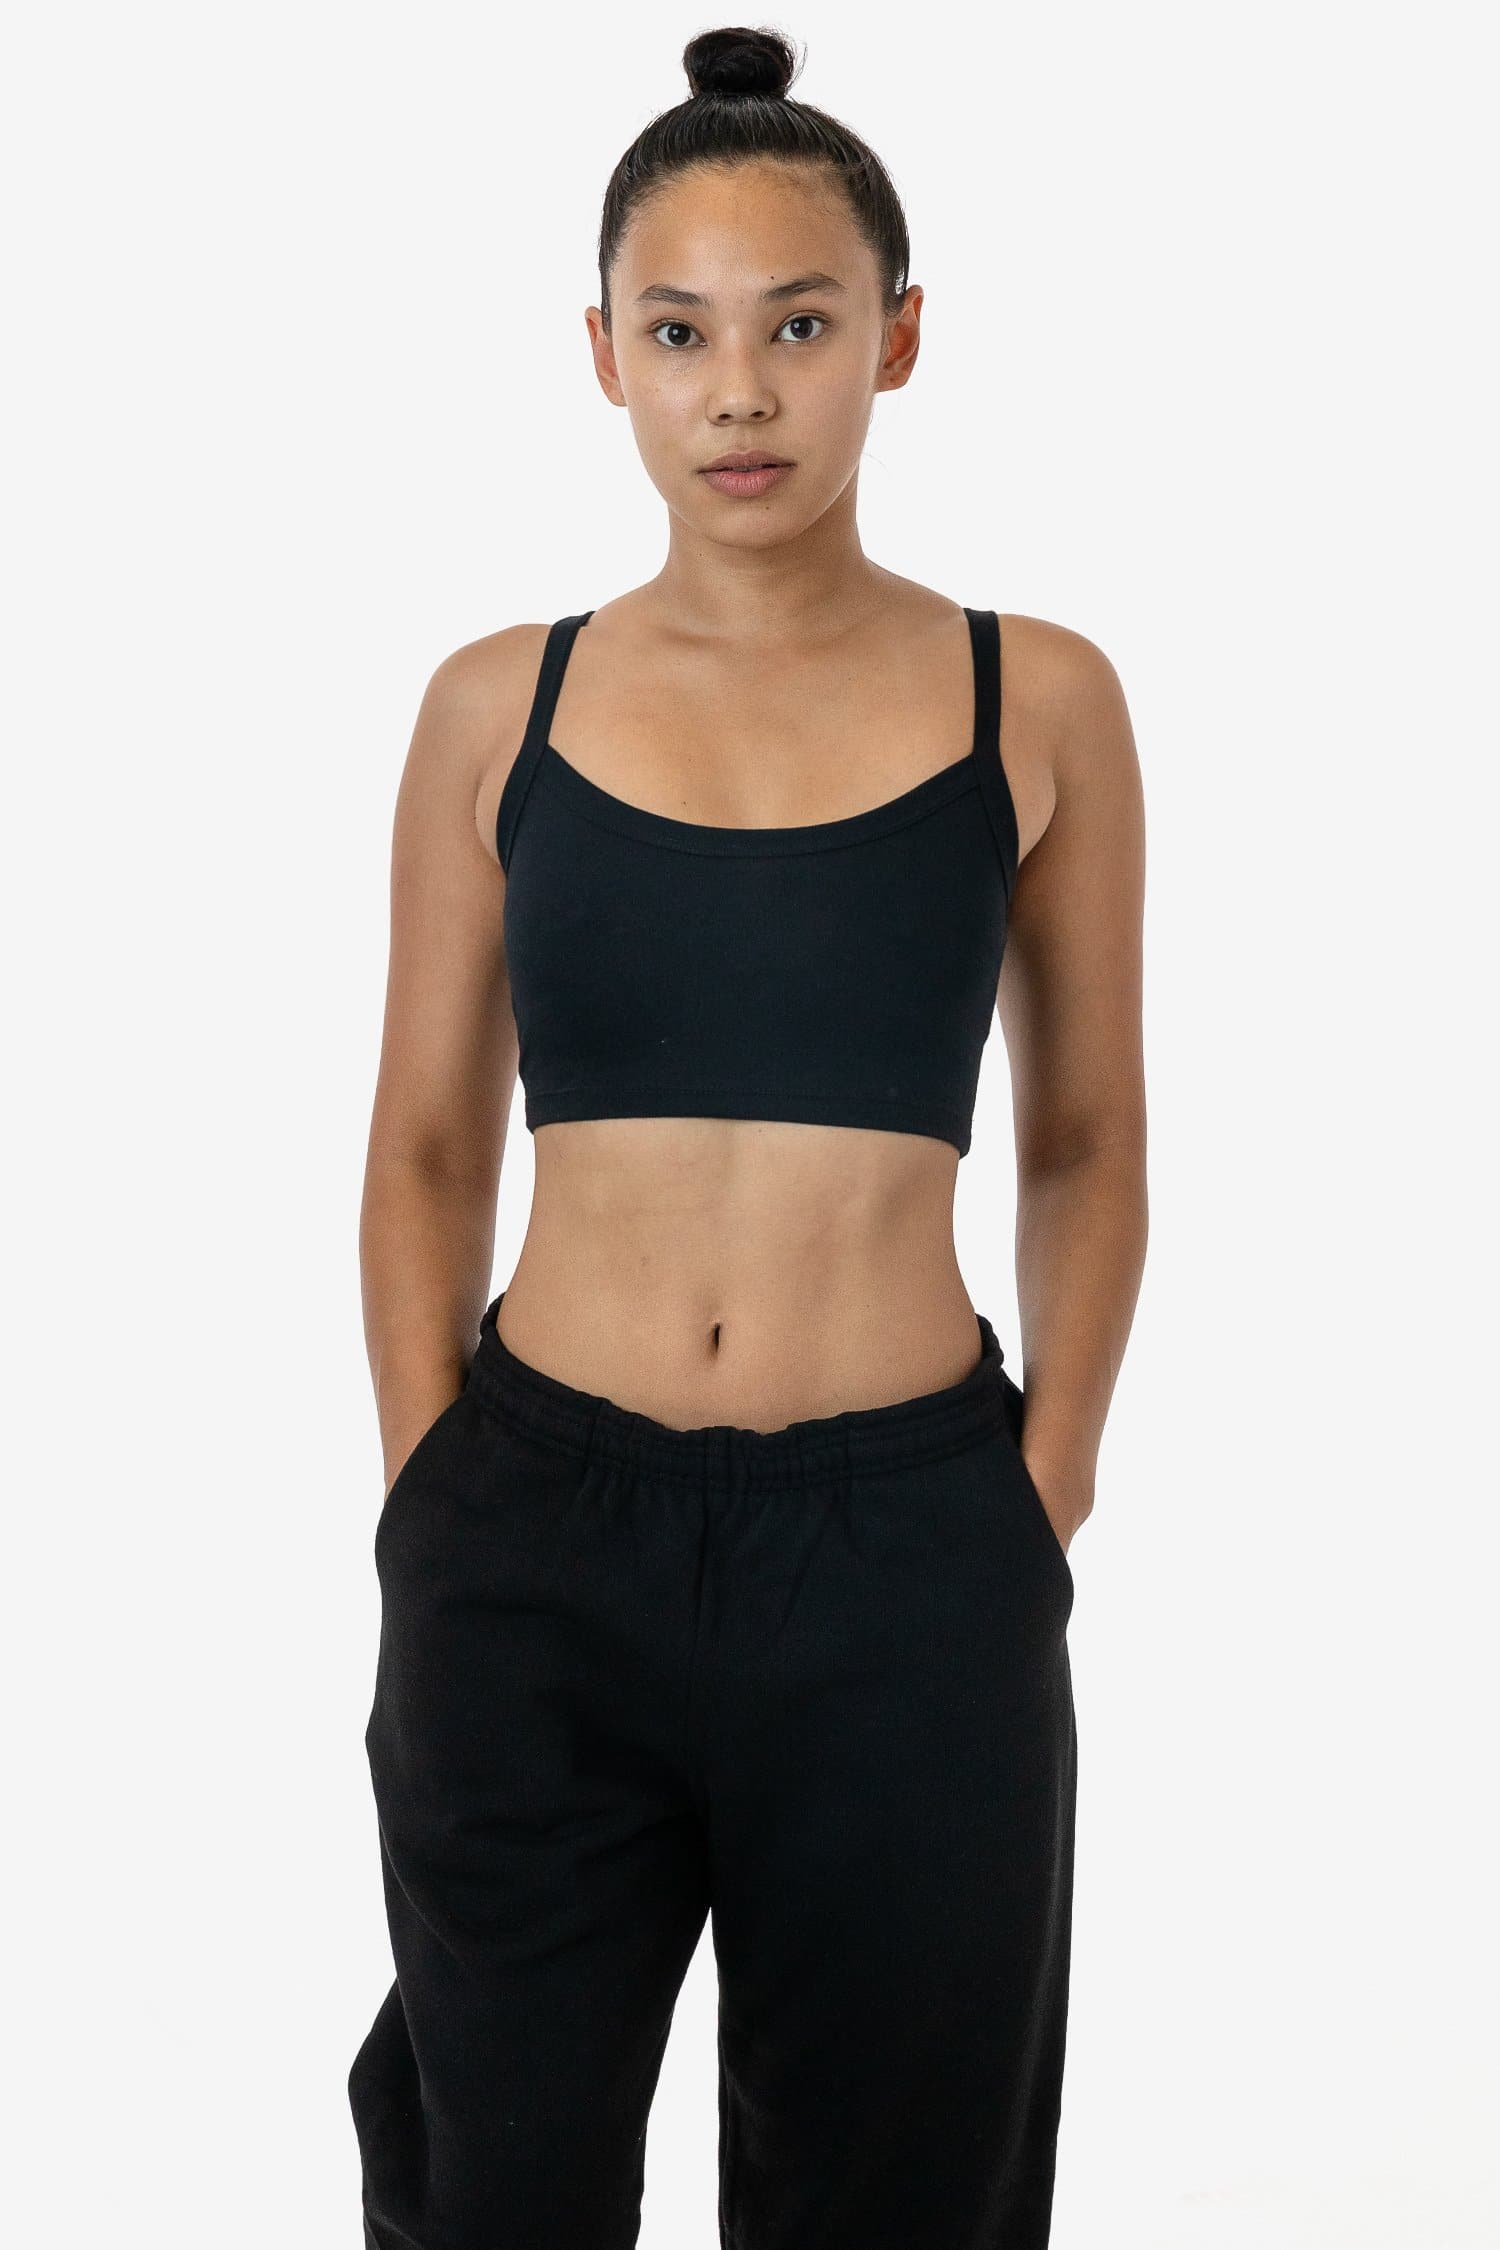 Get a Free Crop Top with Purchase from Los Angeles Apparel